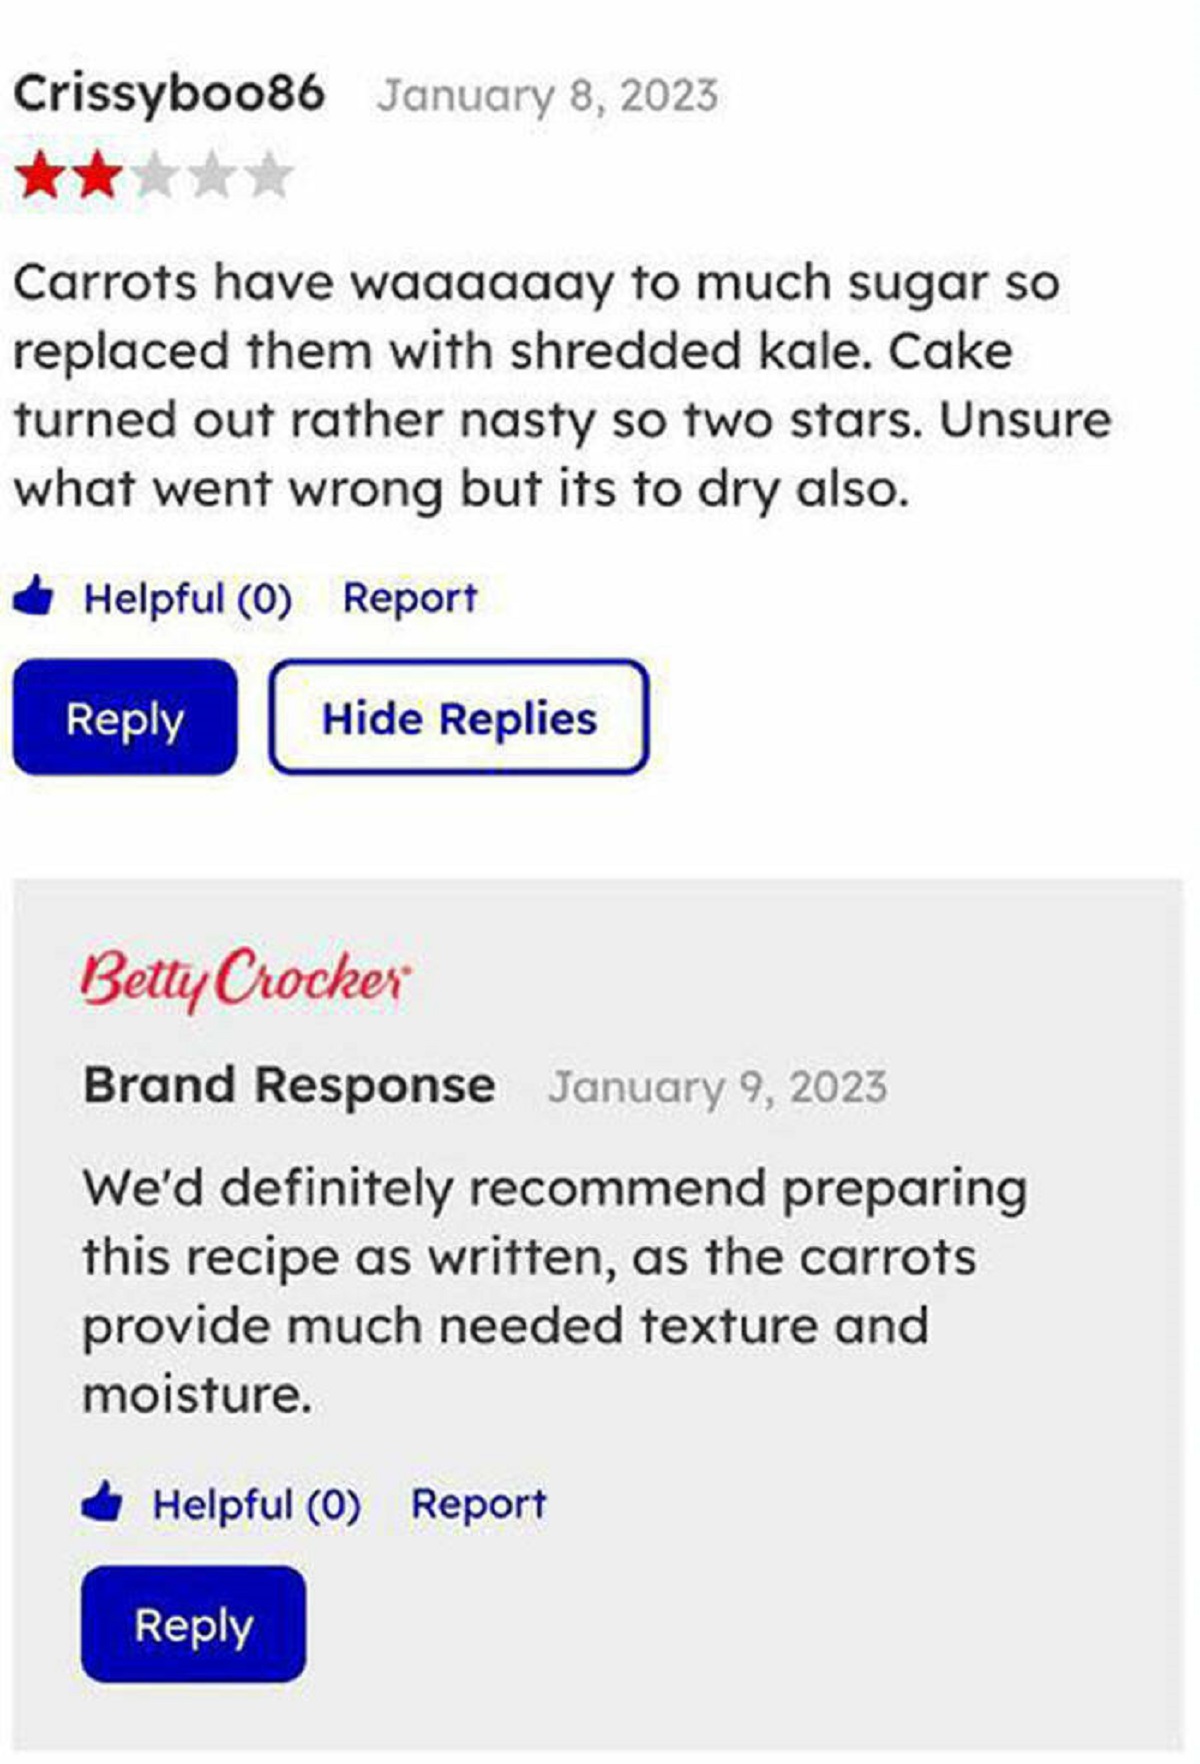 bad review recipe substitution - Crissyboo Carrots have waaaaaay to much sugar so replaced them with shredded kale. Cake turned out rather nasty so two stars. Unsure what went wrong but its to dry also. Helpful 0 Report Hide Replies Betty Crocker Brand Re